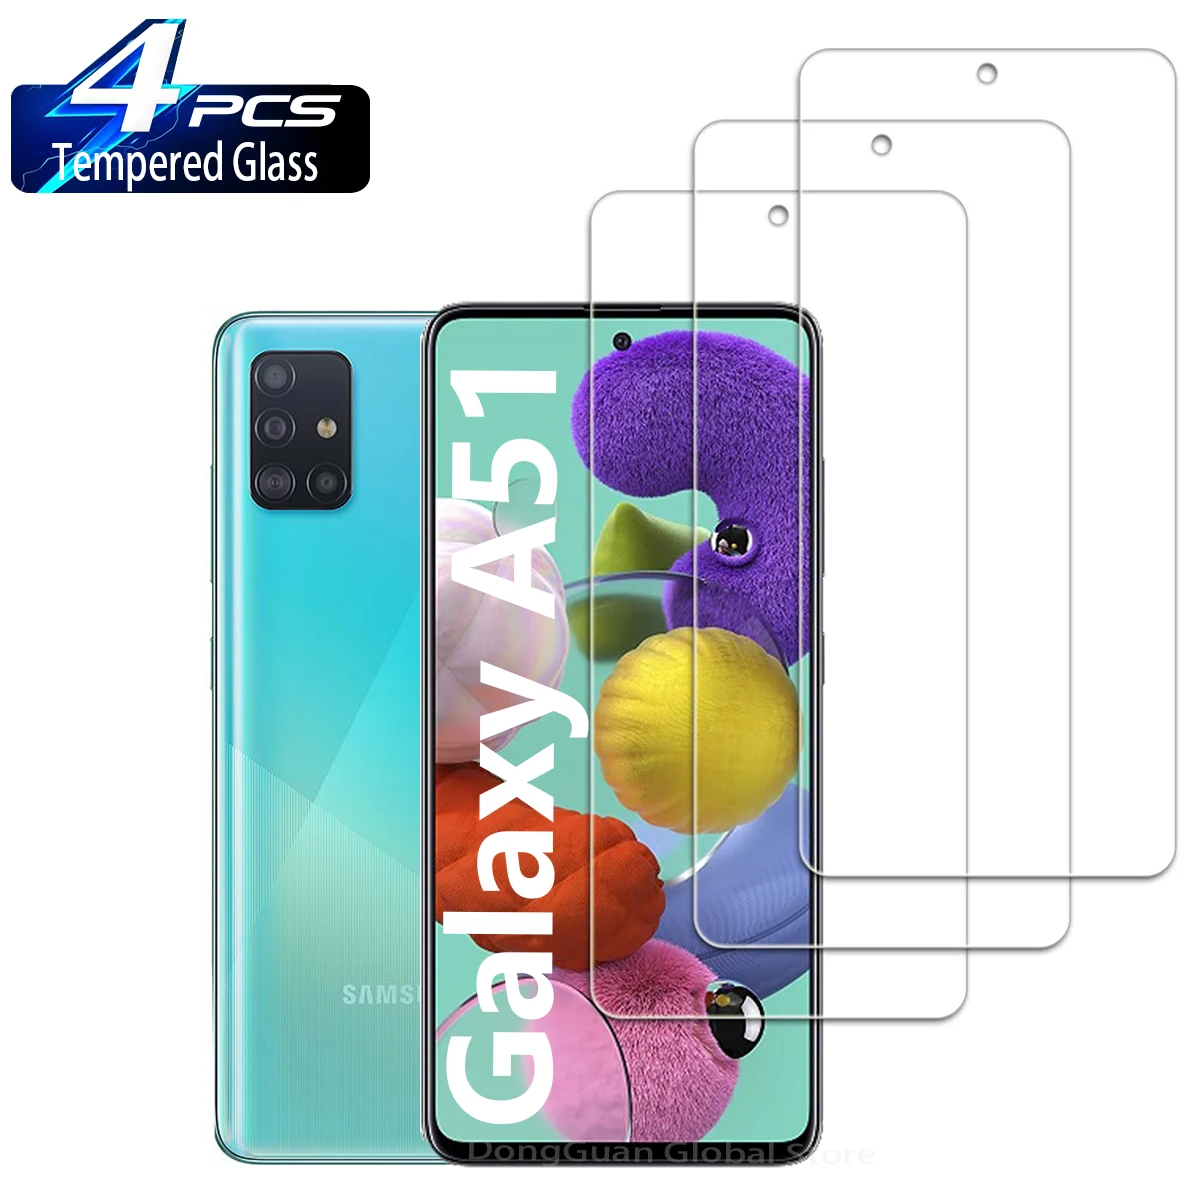 2/4Pcs Tempered Glass For Samsung Galaxy A51 Screen Protector Glass Film for samsung galaxy a52 glass for samsung a52s a72 a51 a71 a22 a03s tempered glass screen protector film for samsung a52 glass